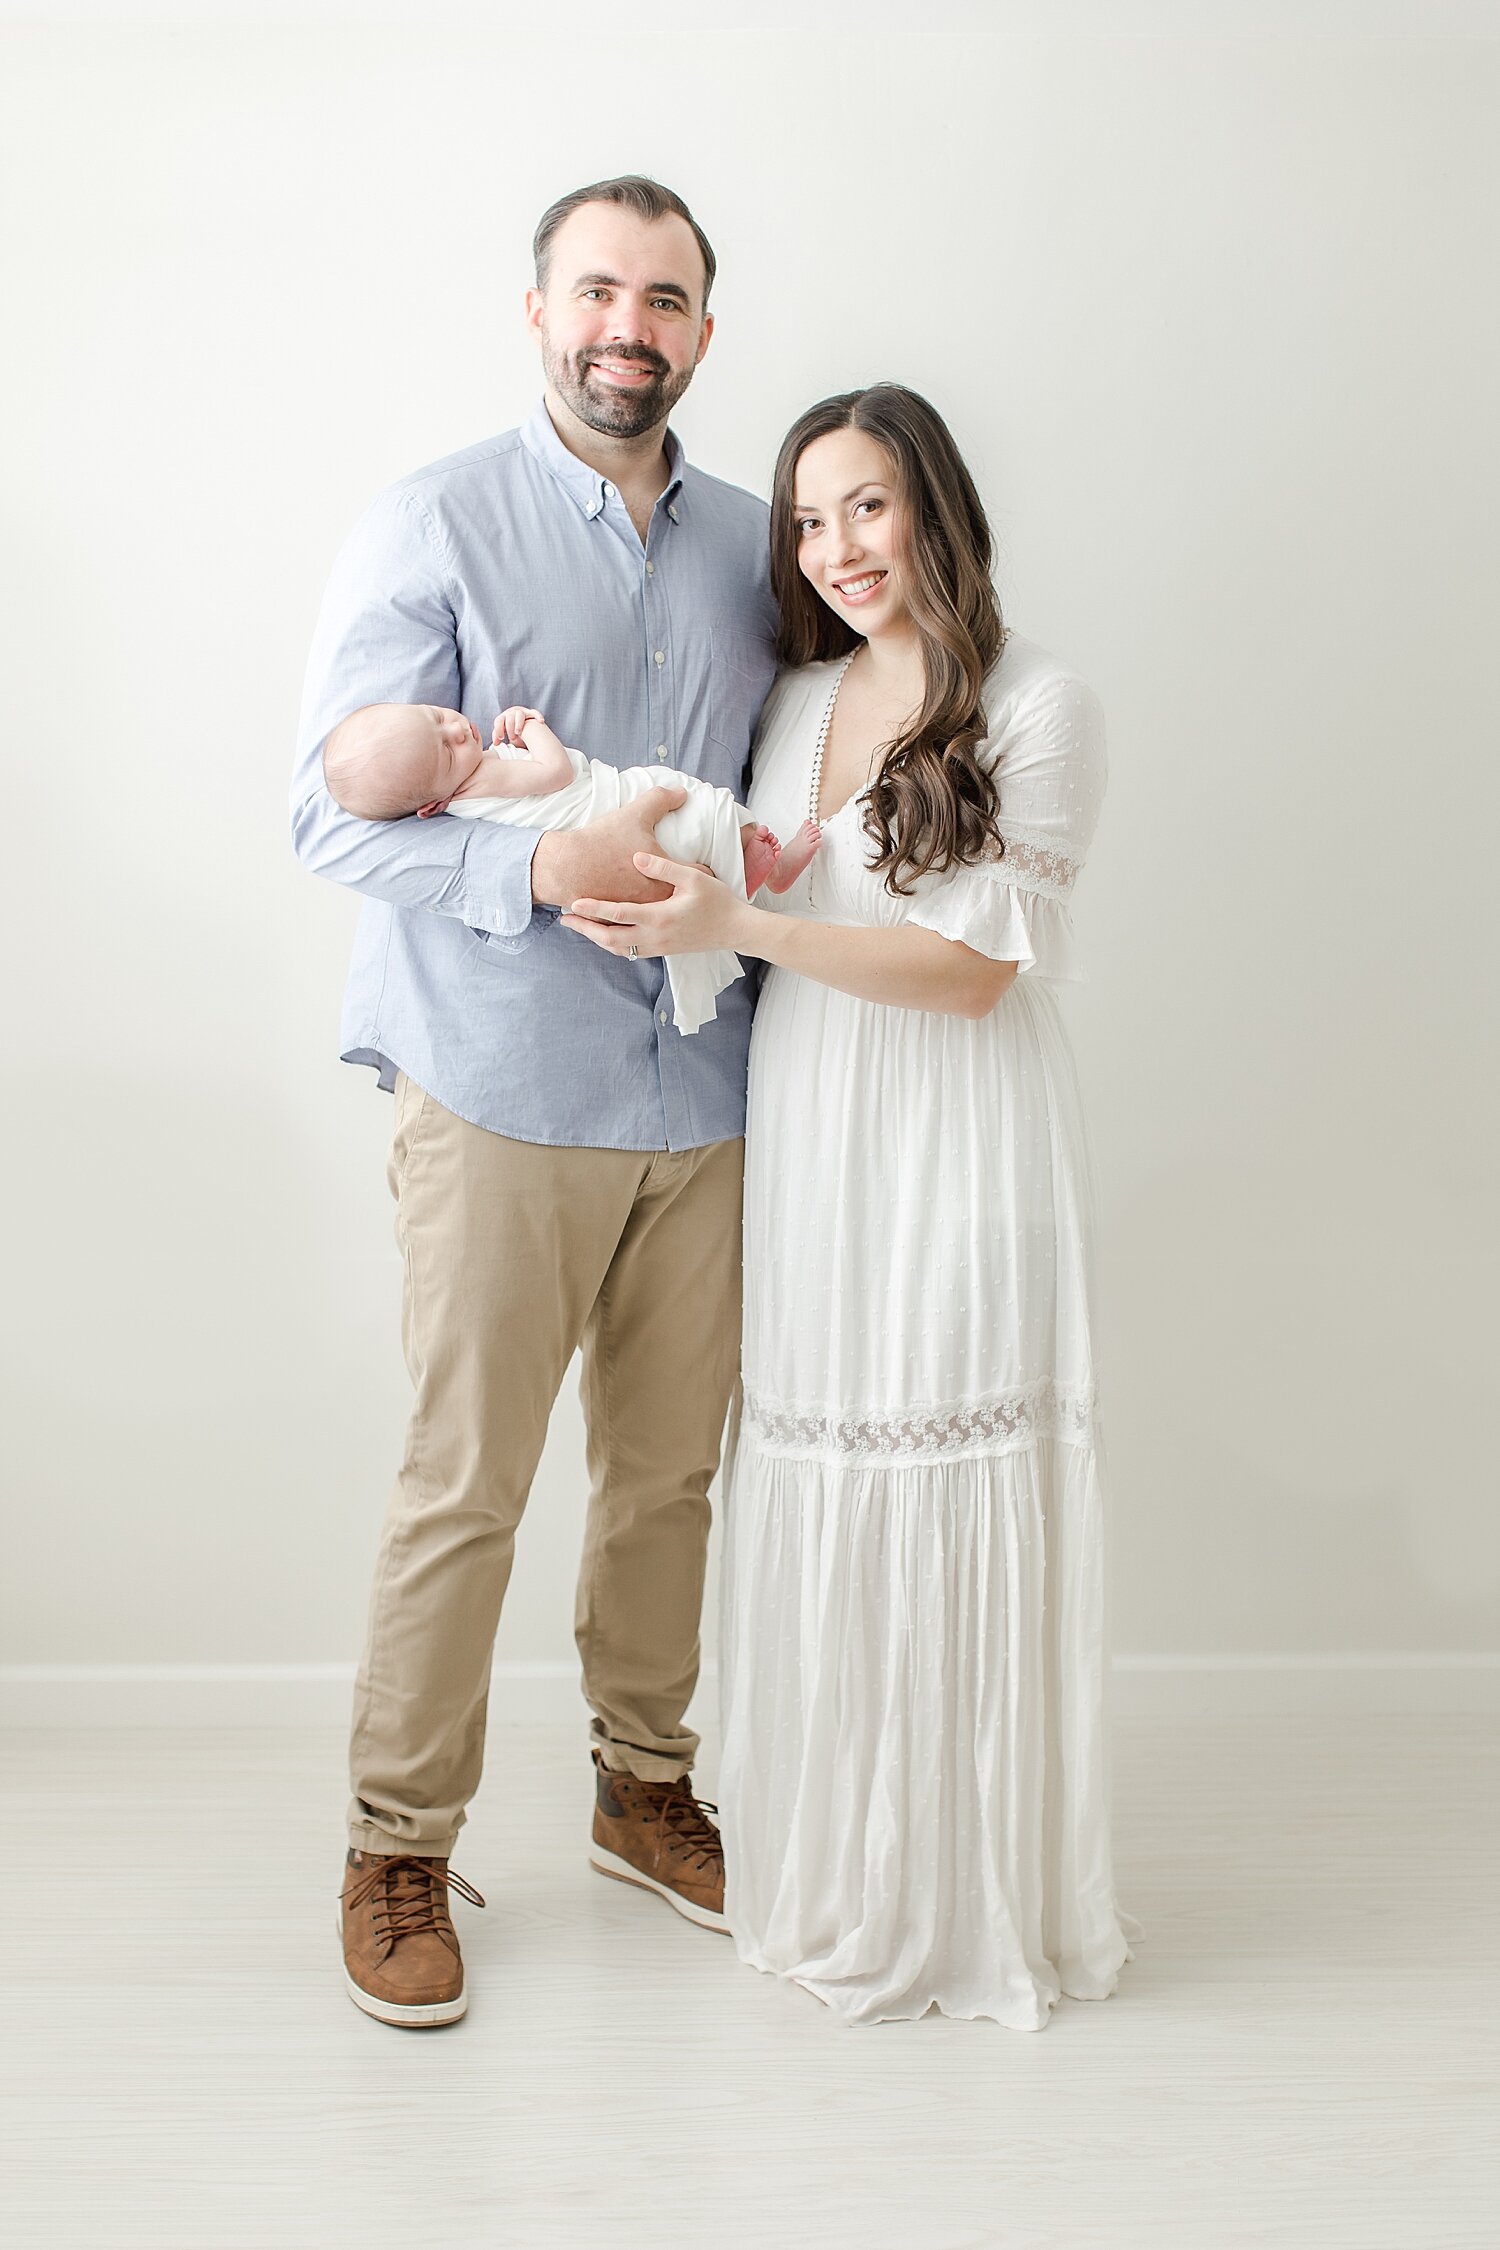 First family portrait | Kristin Wood Photography